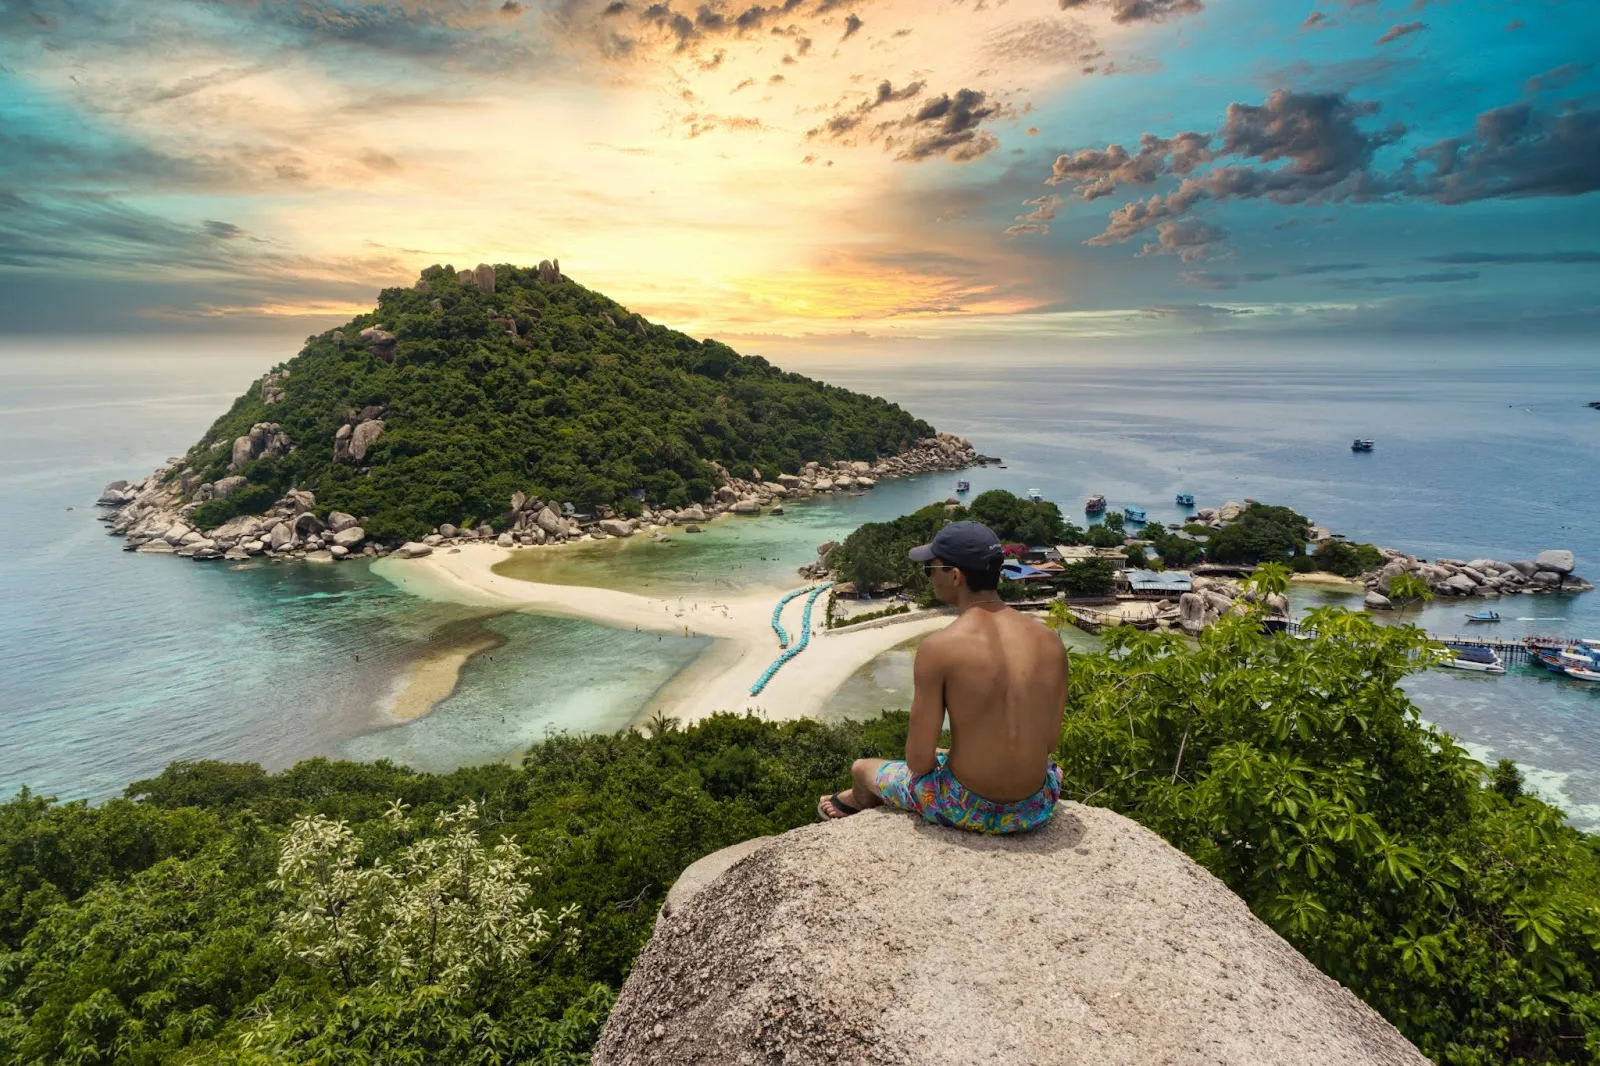 A man sitting on the edge of the cliff looking at the overview of Koh Tao